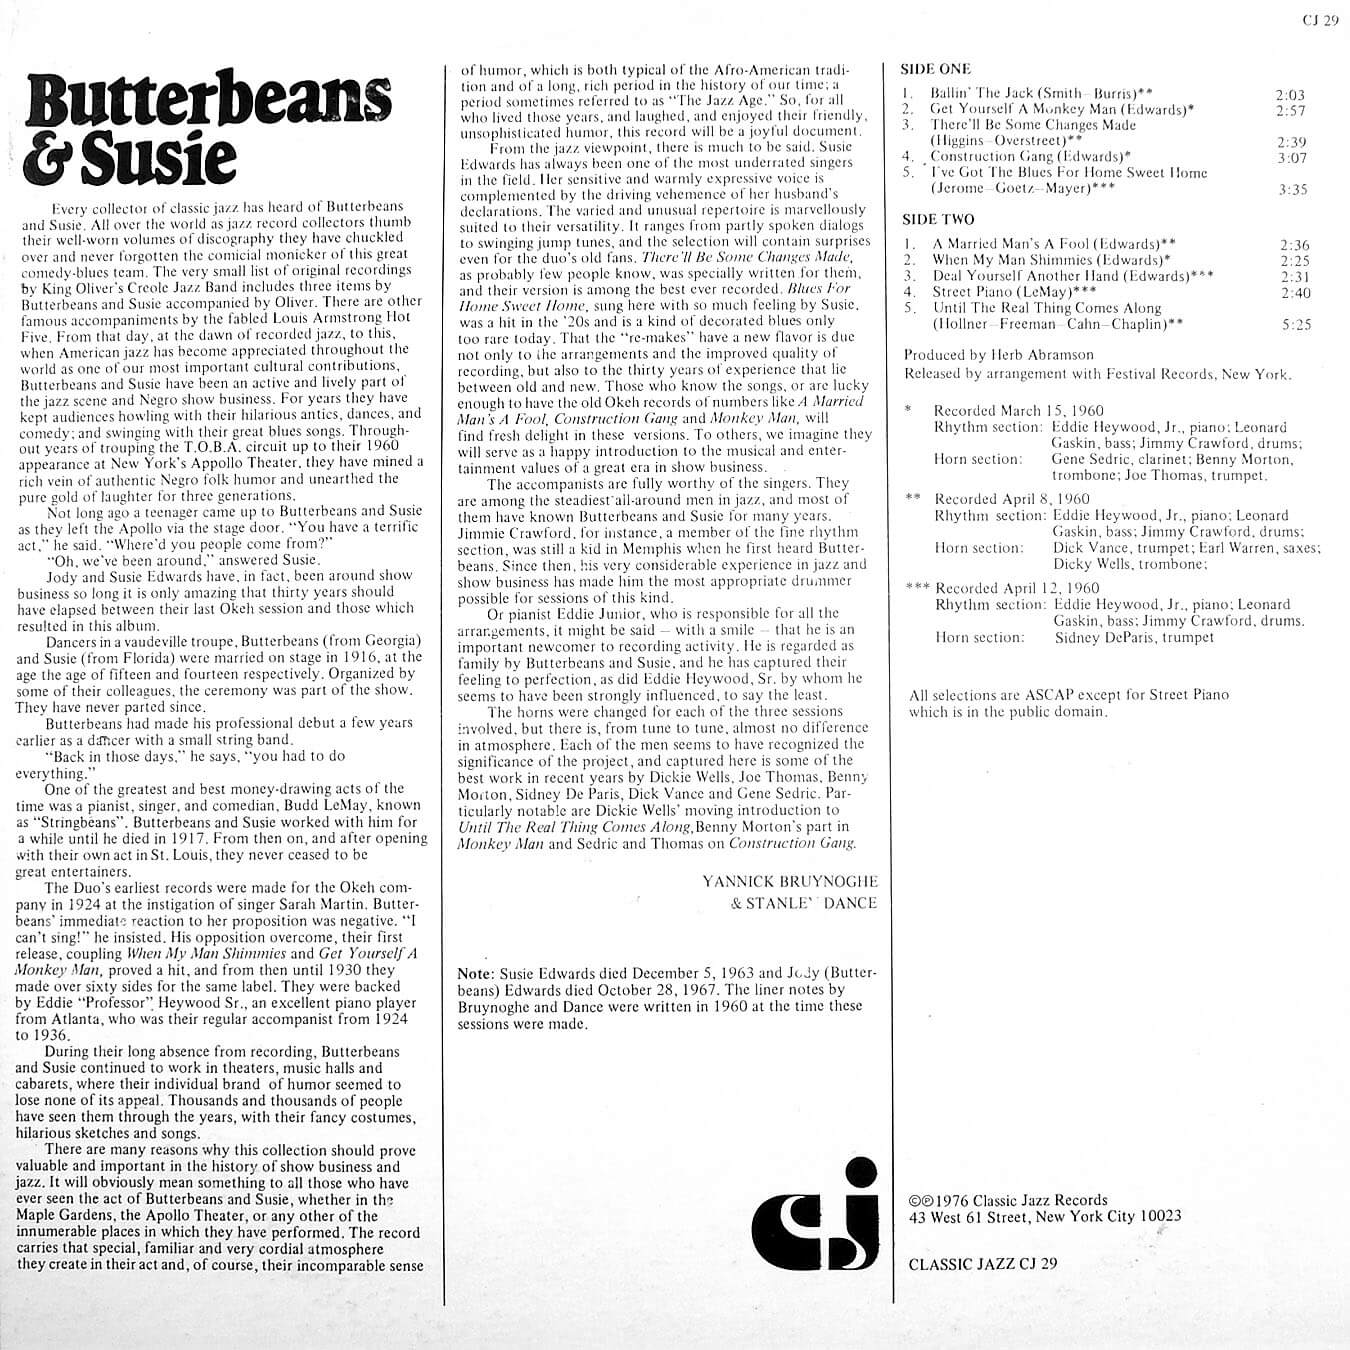 butterbeans-susie-back1